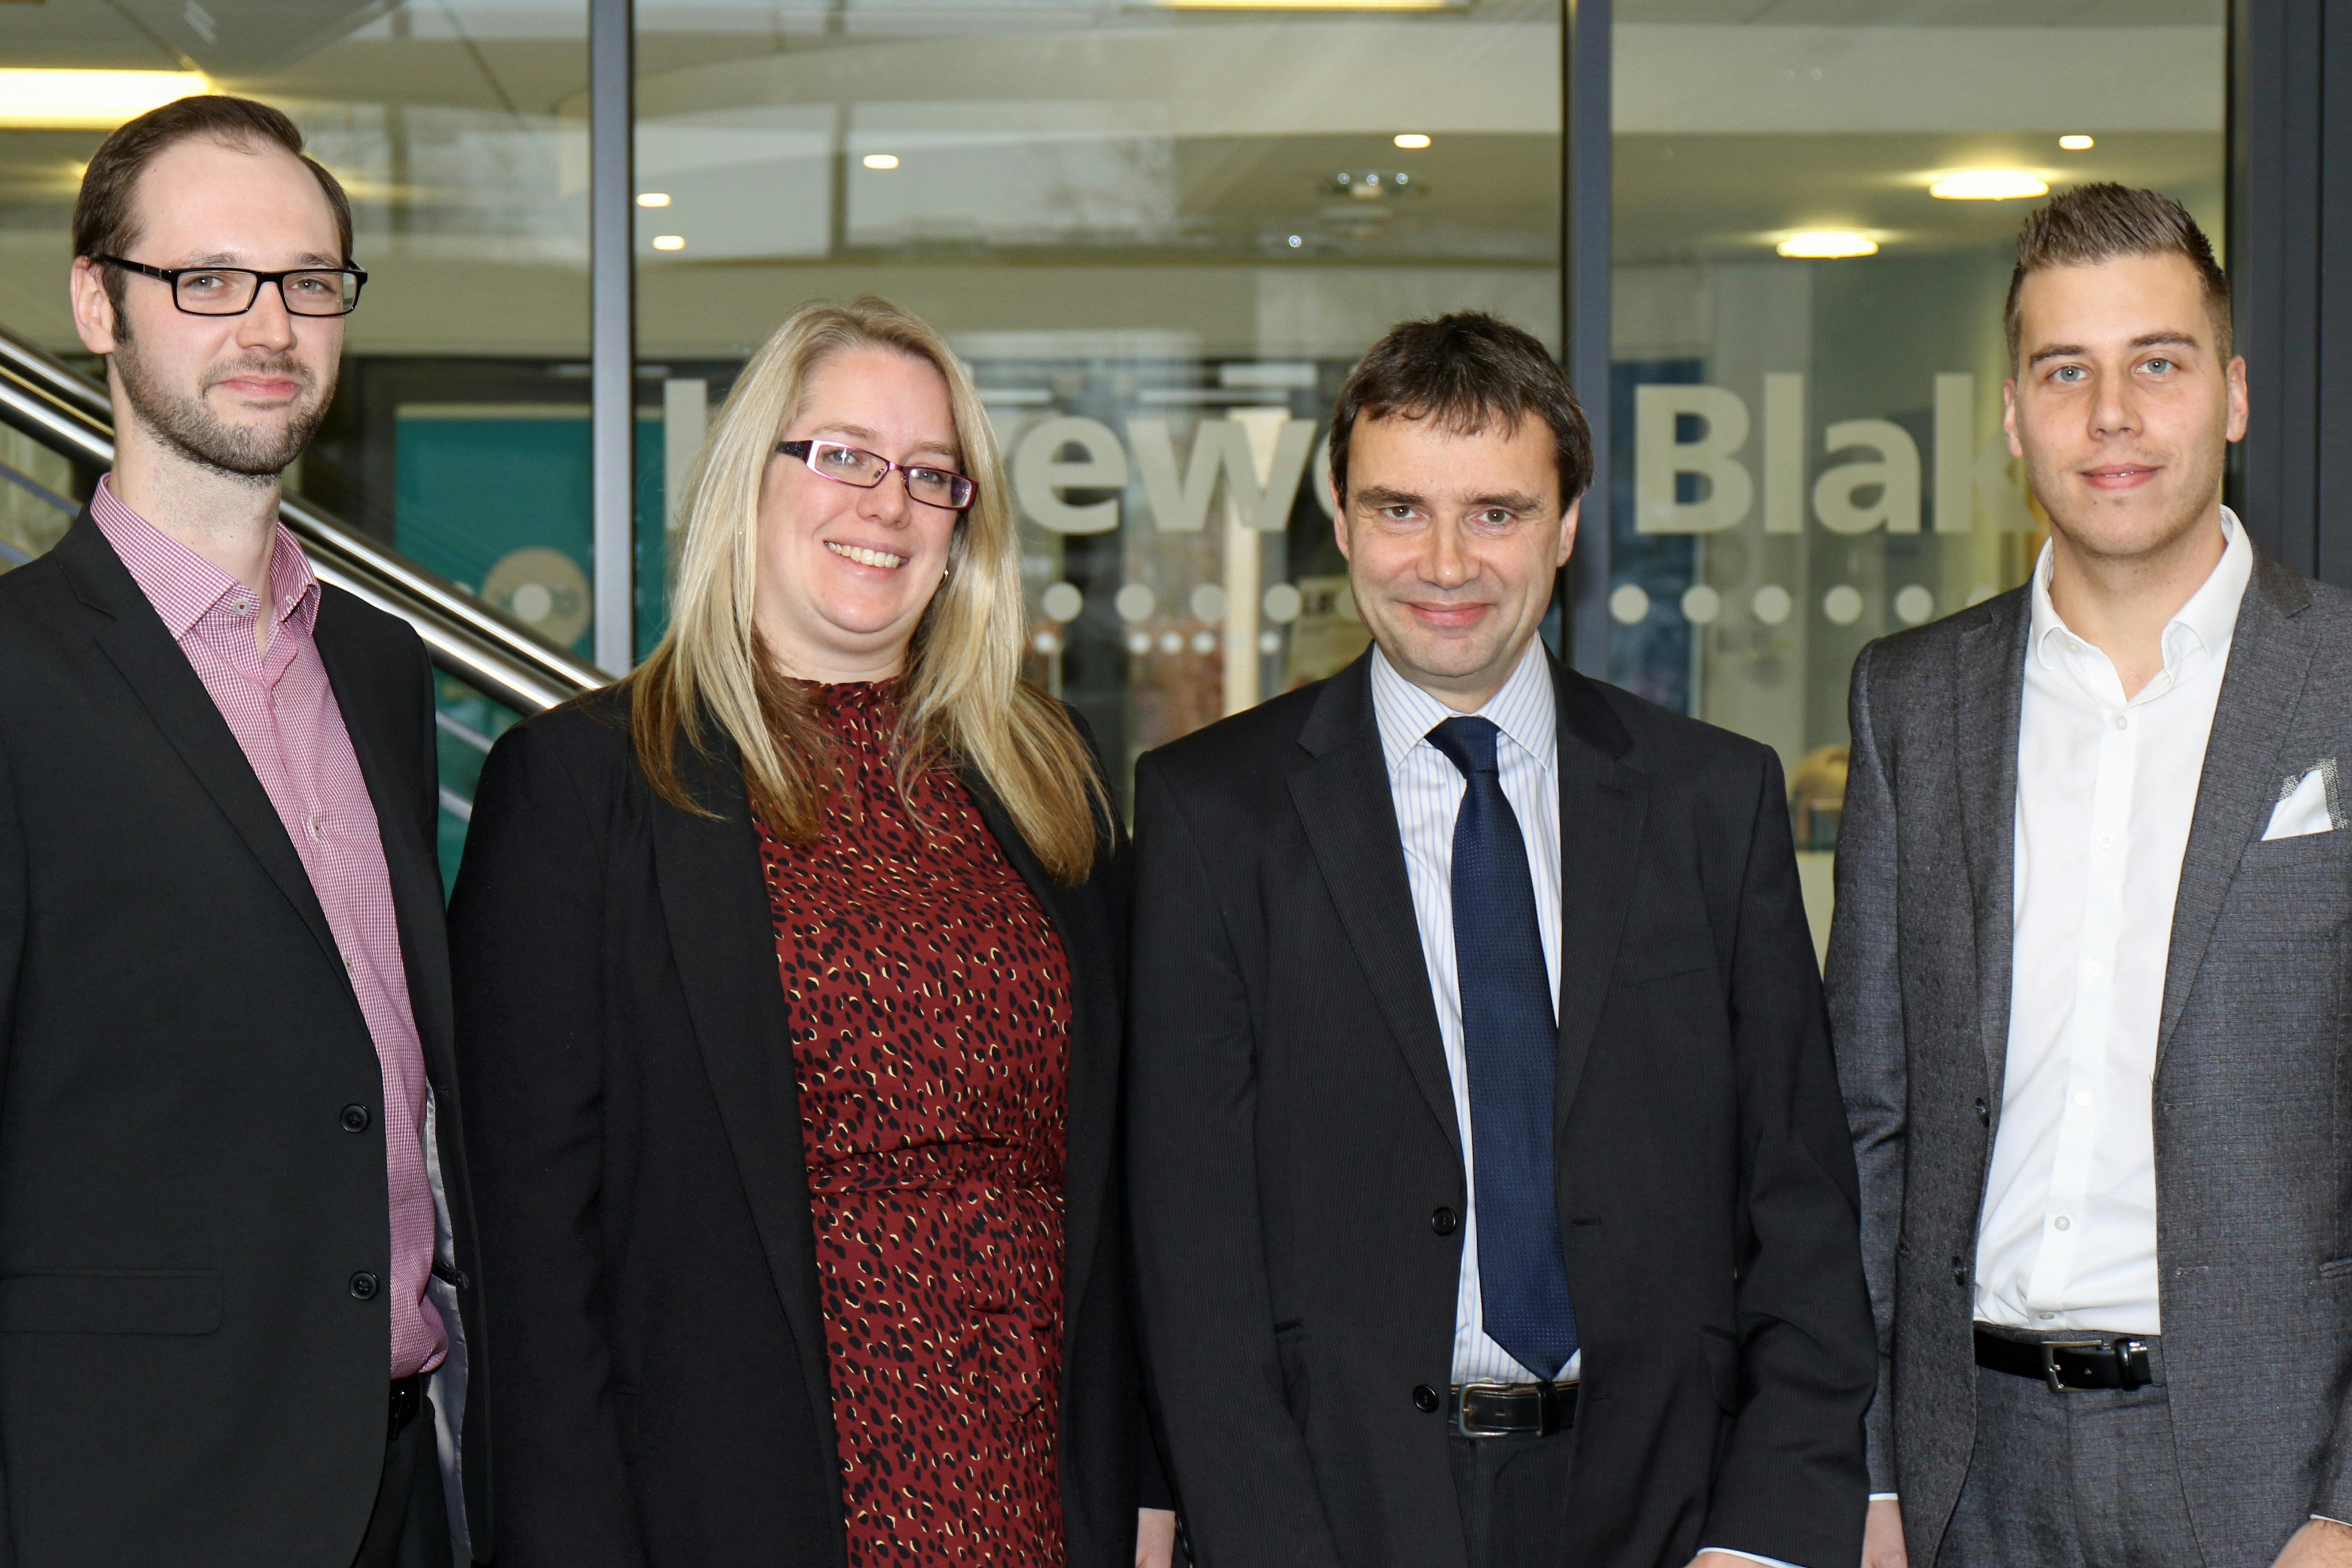 Colin Fish, with three new managers at Lovewell Blake